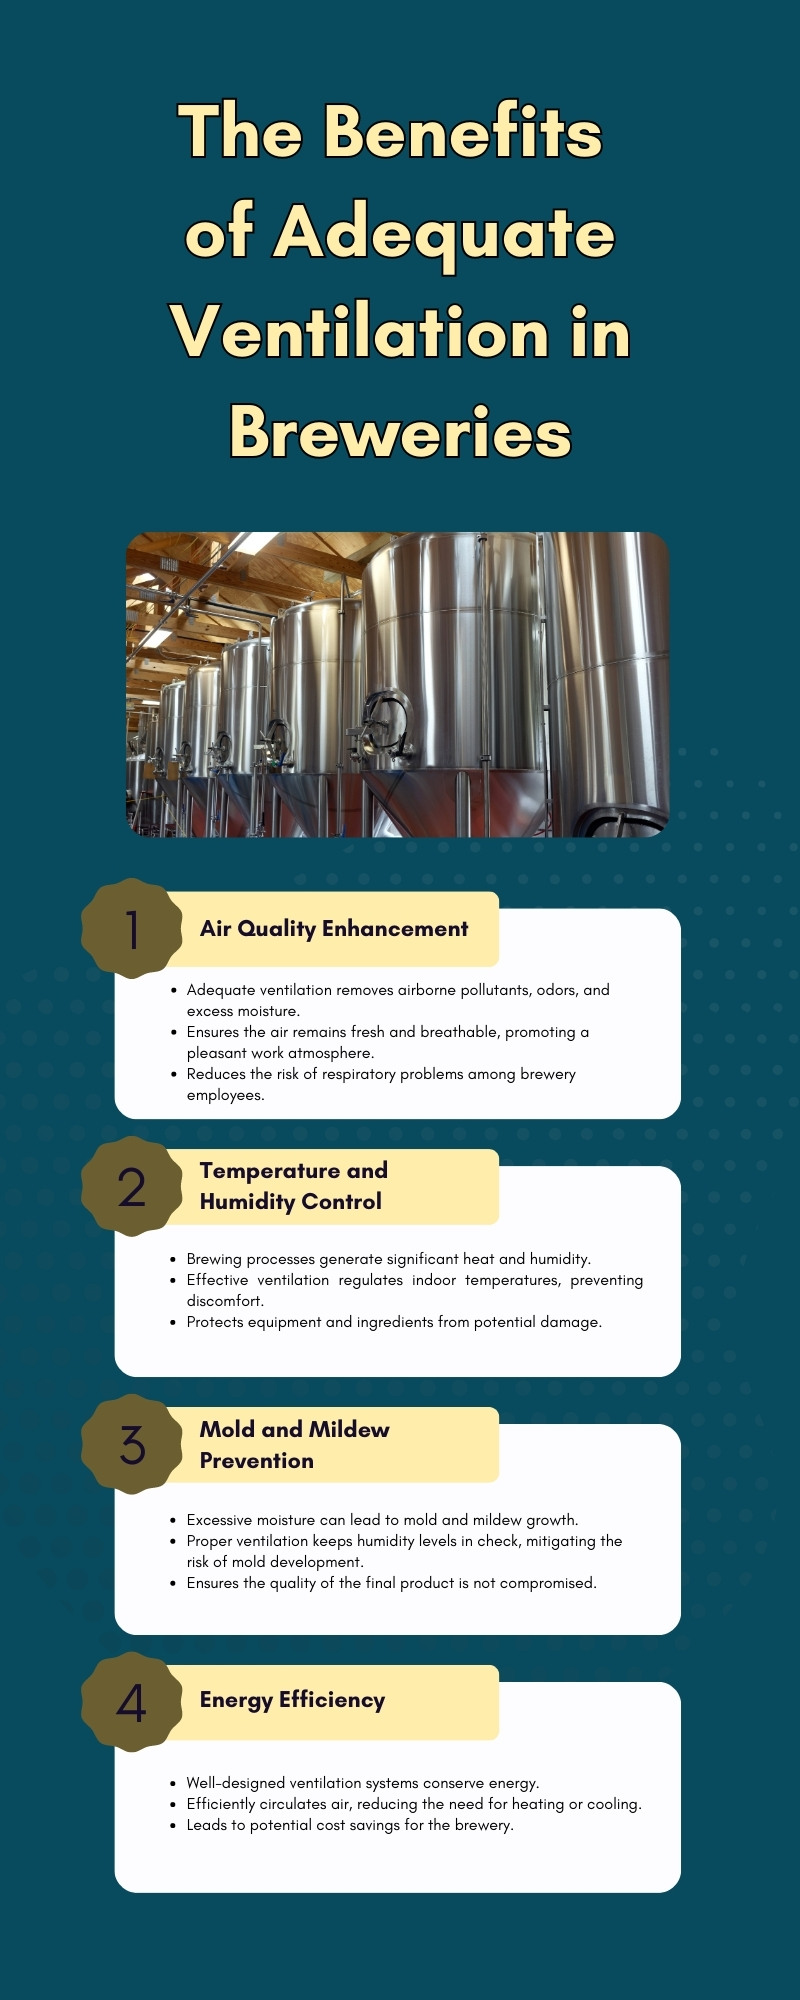 The Benefits 
of Adequate Ventilation in Breweries